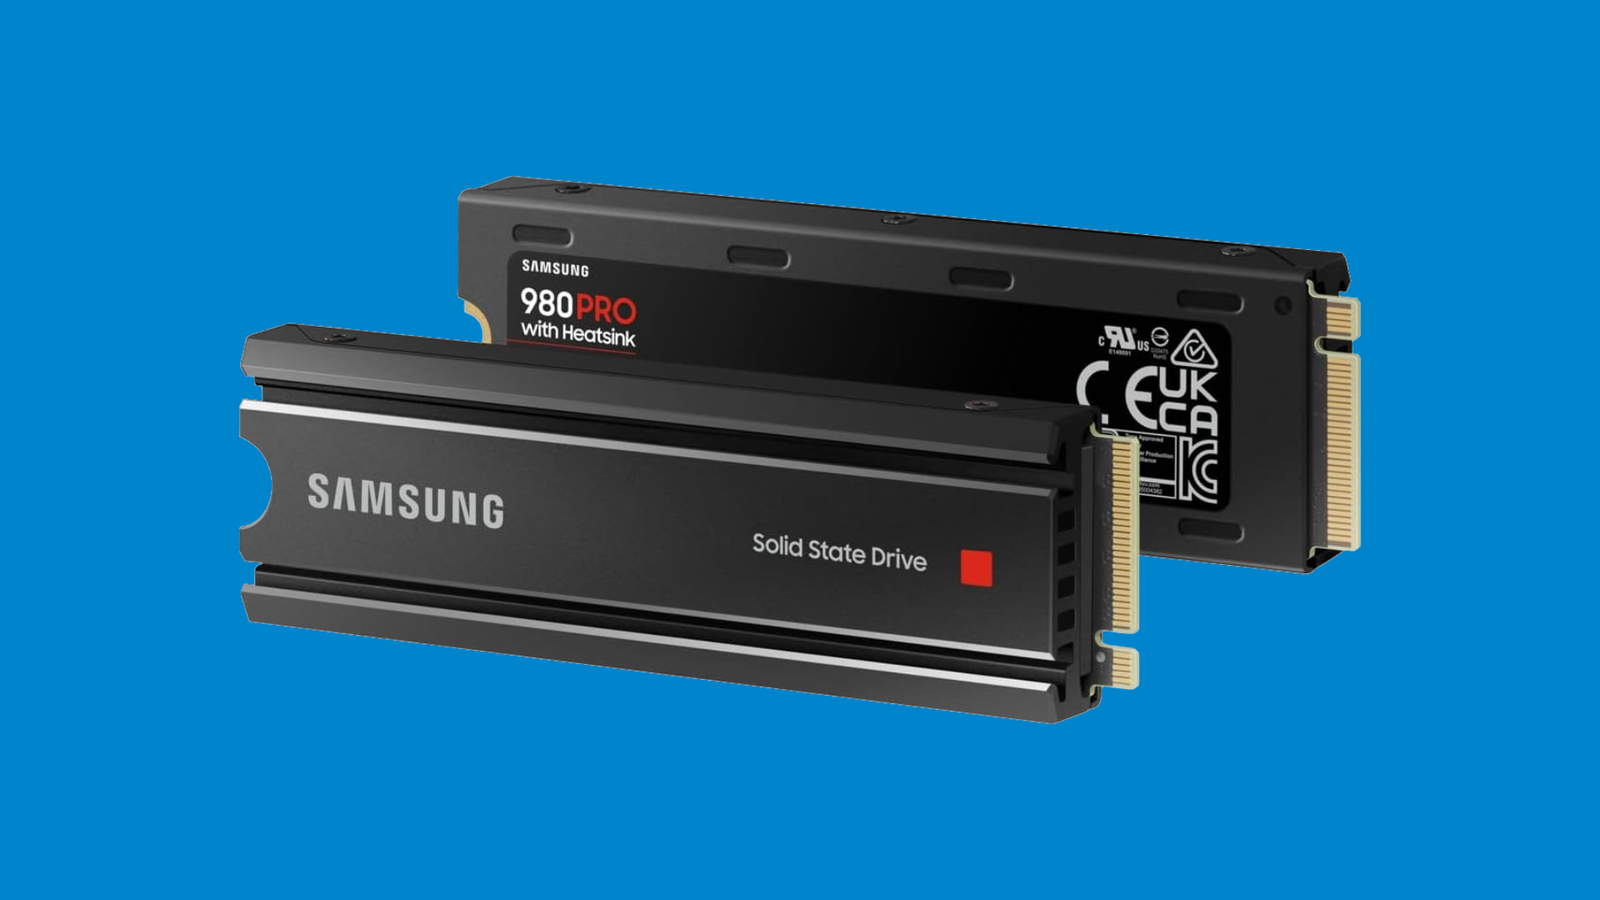 The 1TB Samsung 980 PRO SSD with Heatsink is £92 at